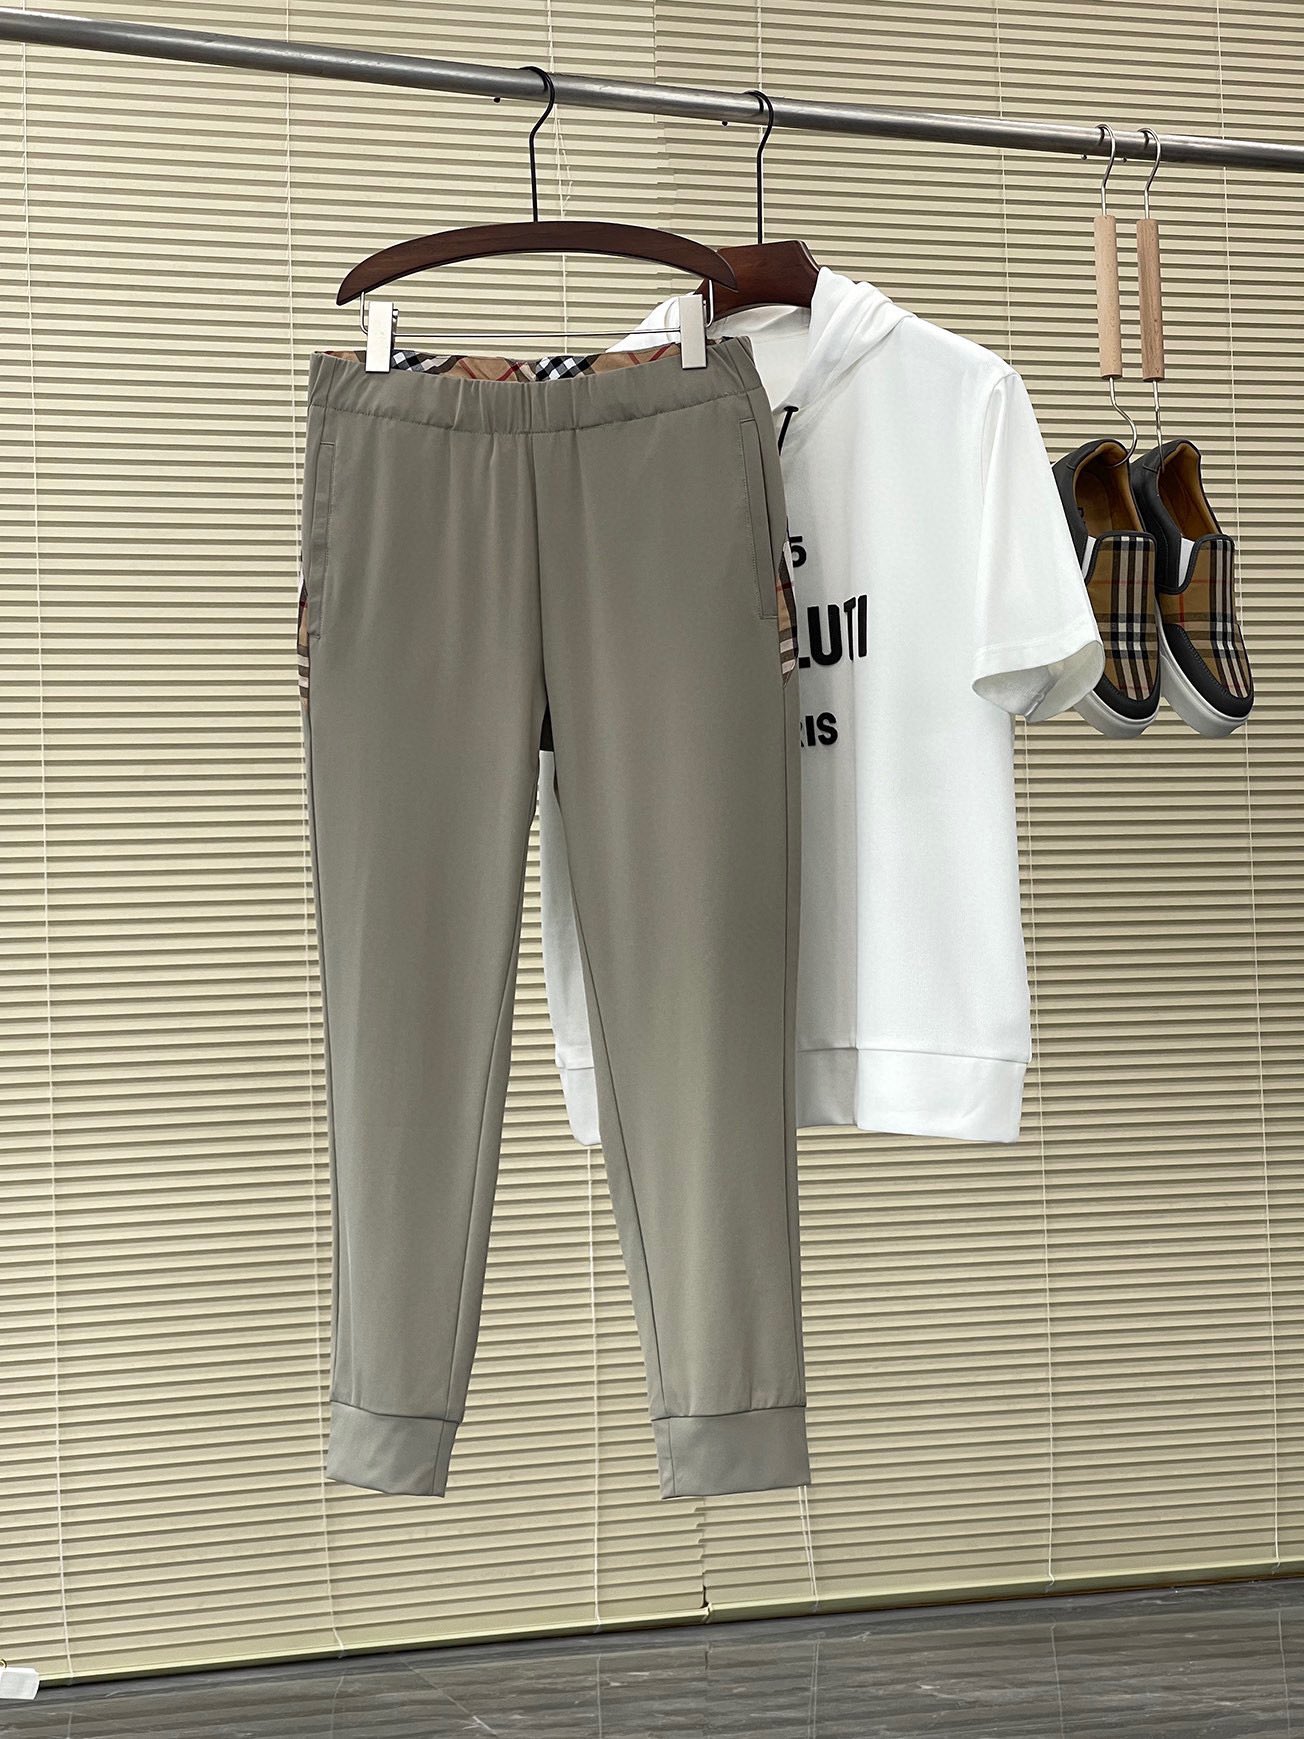 Buying Replica
 Clothing Pants & Trousers Black Grey Khaki Splicing Men Polyester Spandex Spring/Summer Collection Fashion Casual